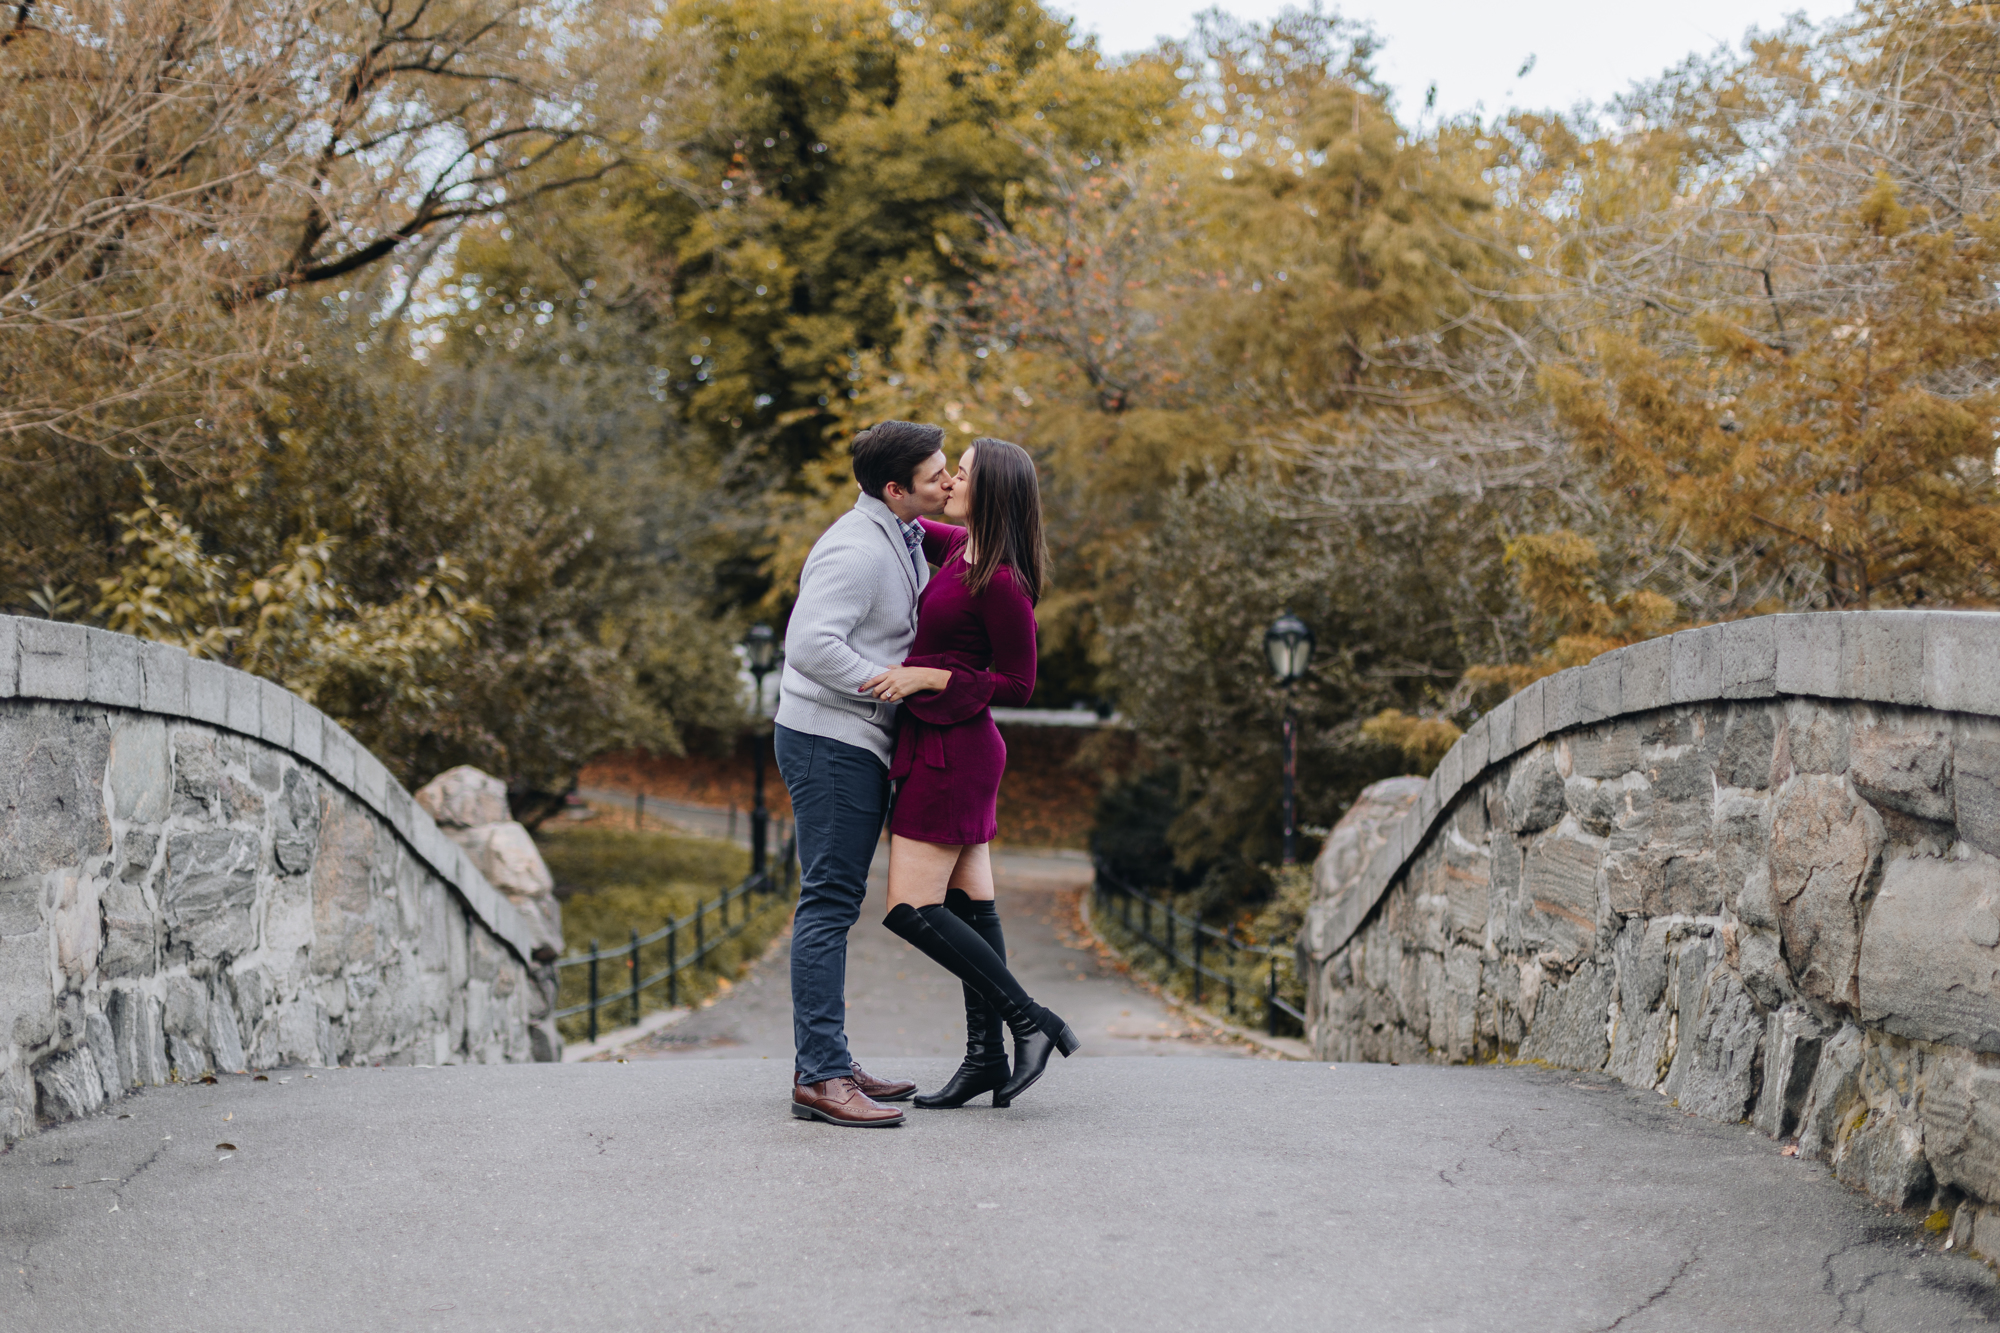 Romantic Engagement Photo Locations in Central Park